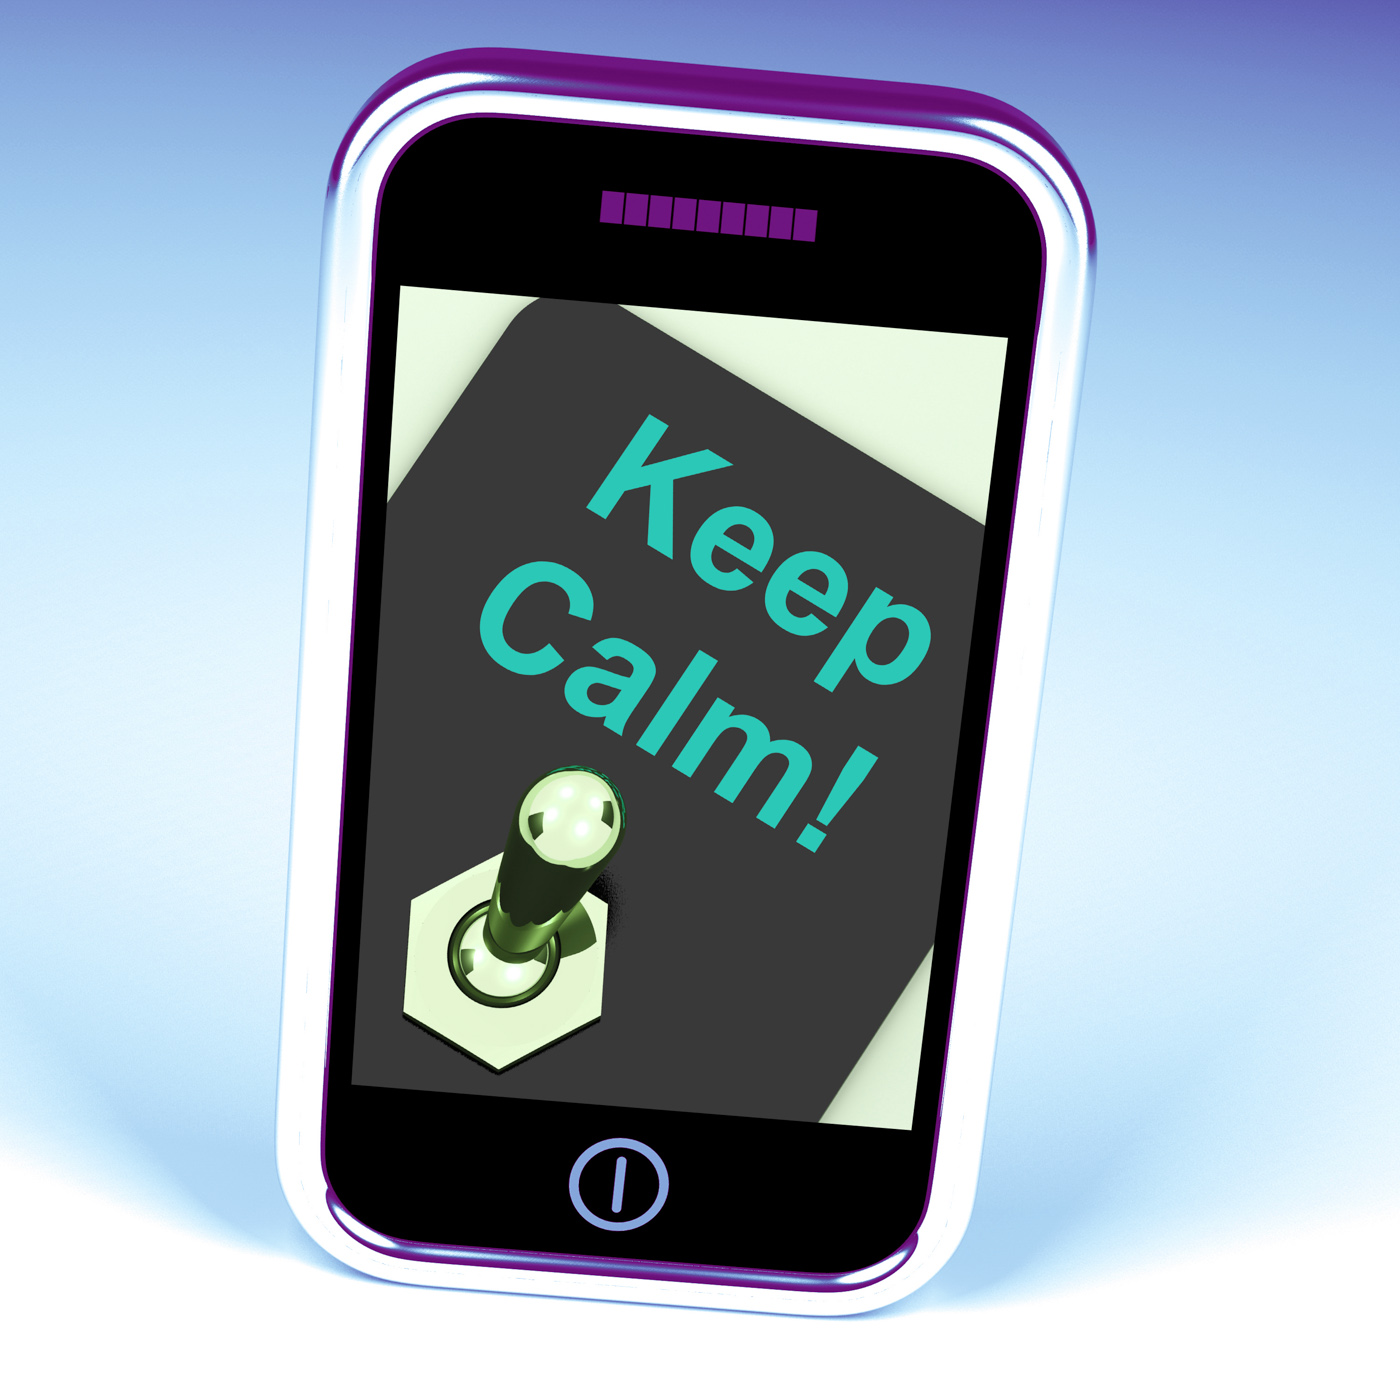 Keep calm switch shows keeping calmness tranquil and relaxed photo